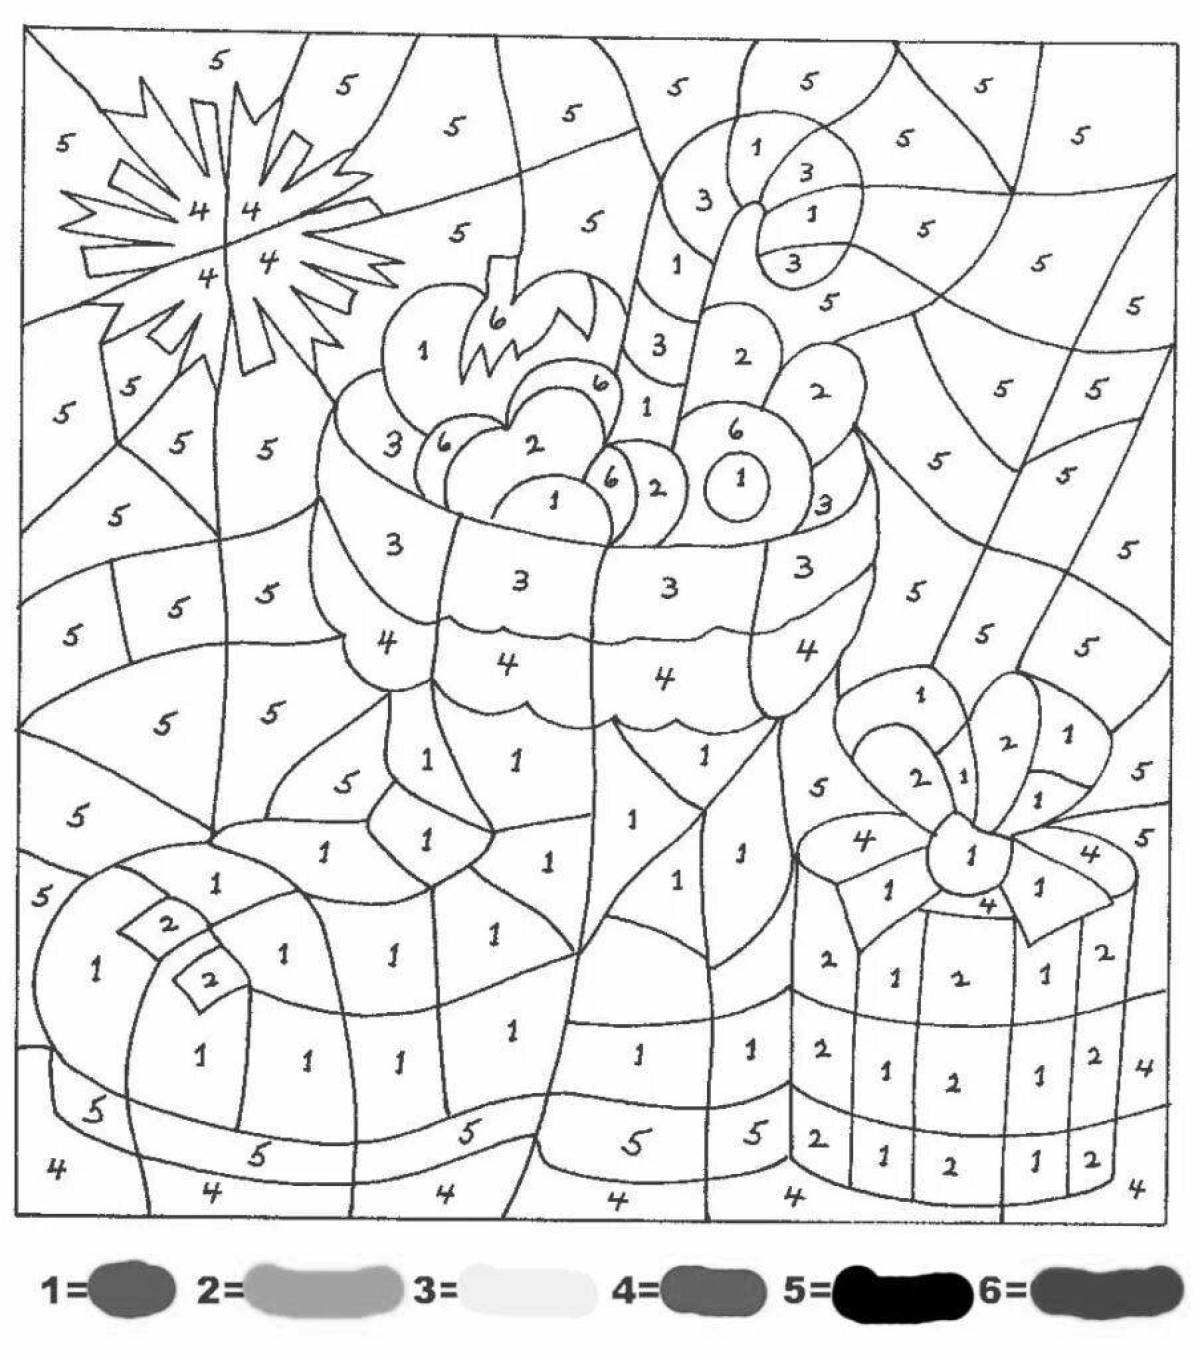 Amazing winter coloring by numbers for kids 5-7 years old